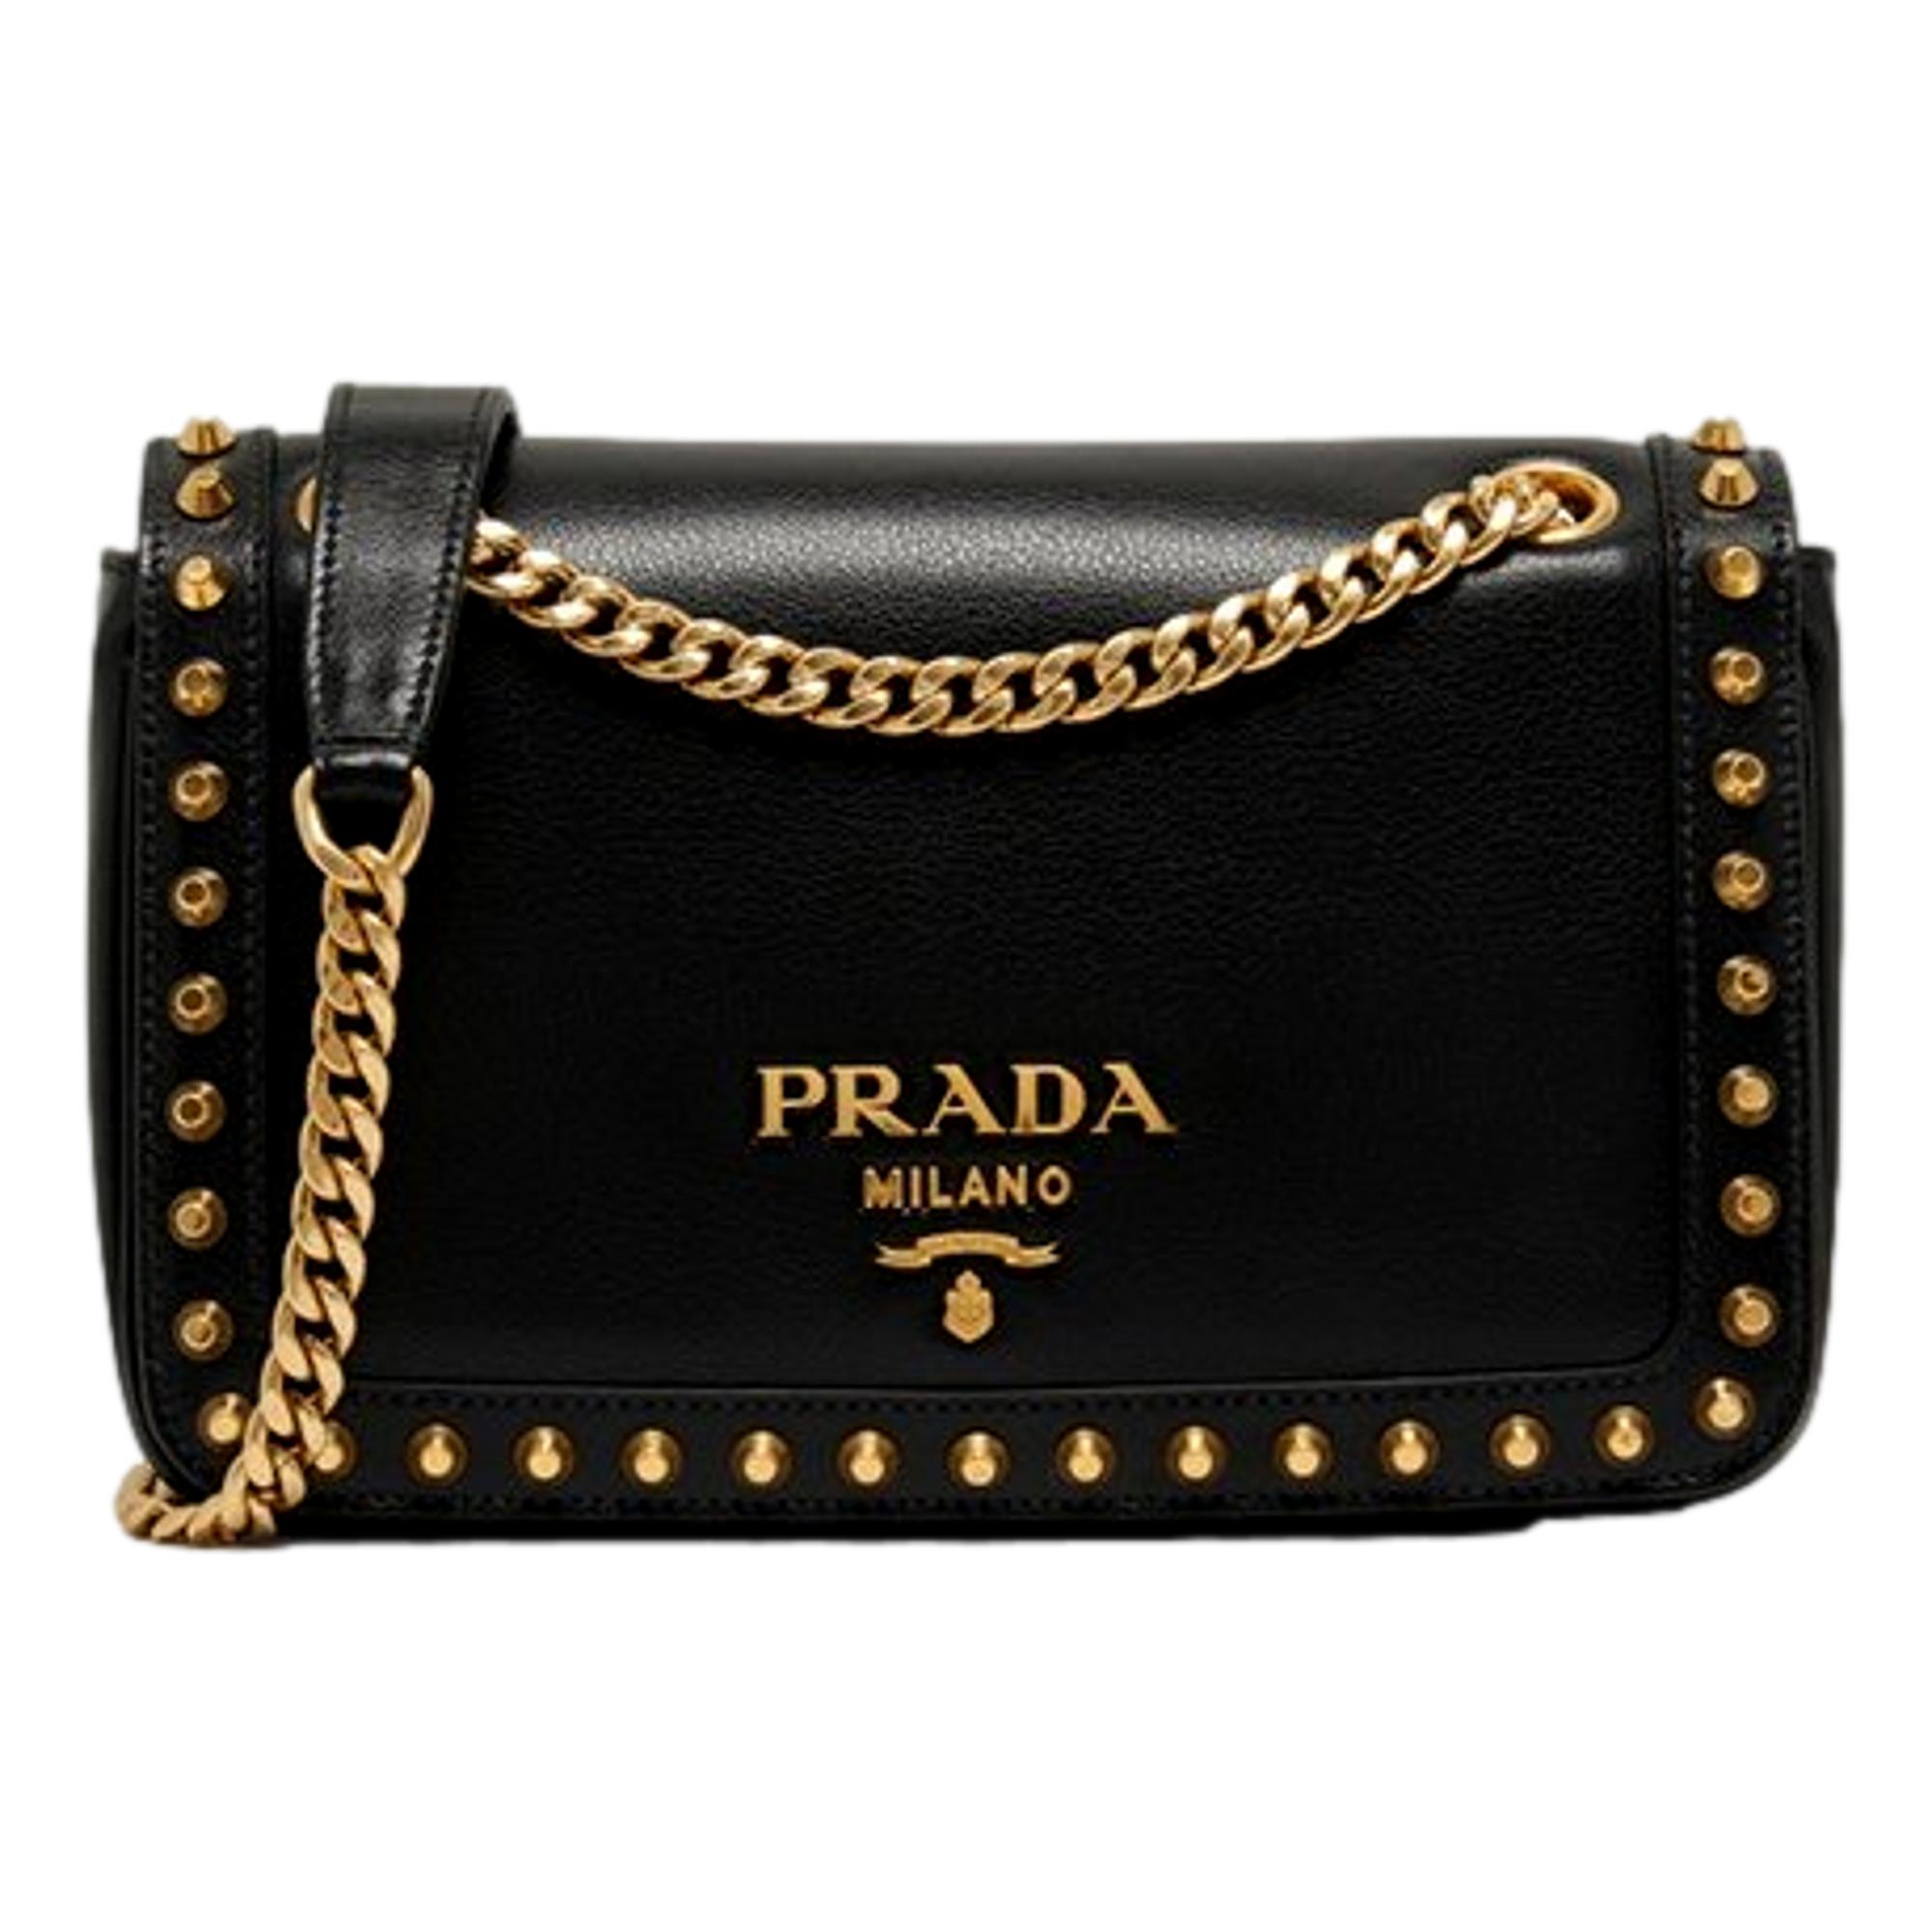 Prada Pattina Black Calf Leather Studded Flap Chain Crossbody Bag at_Queen_Bee_of_Beverly_Hills